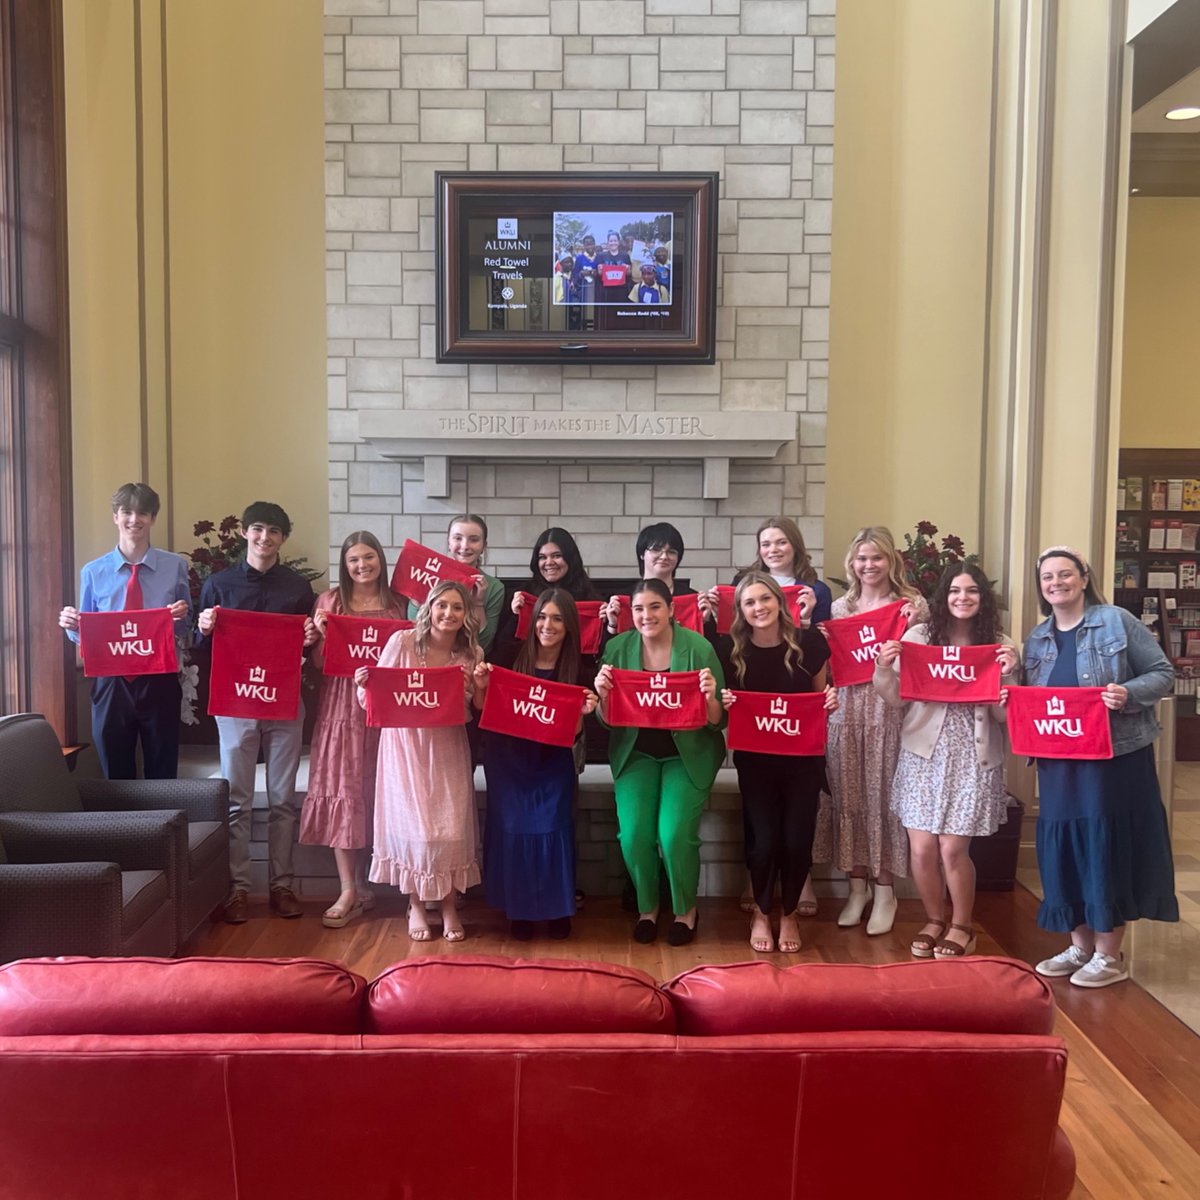 The Division of Philanthropy & Alumni Engagement welcomed the Edmonson County Youth Leadership group to campus. Excited to share the #WKU Spirit with these future Hilltoppers!